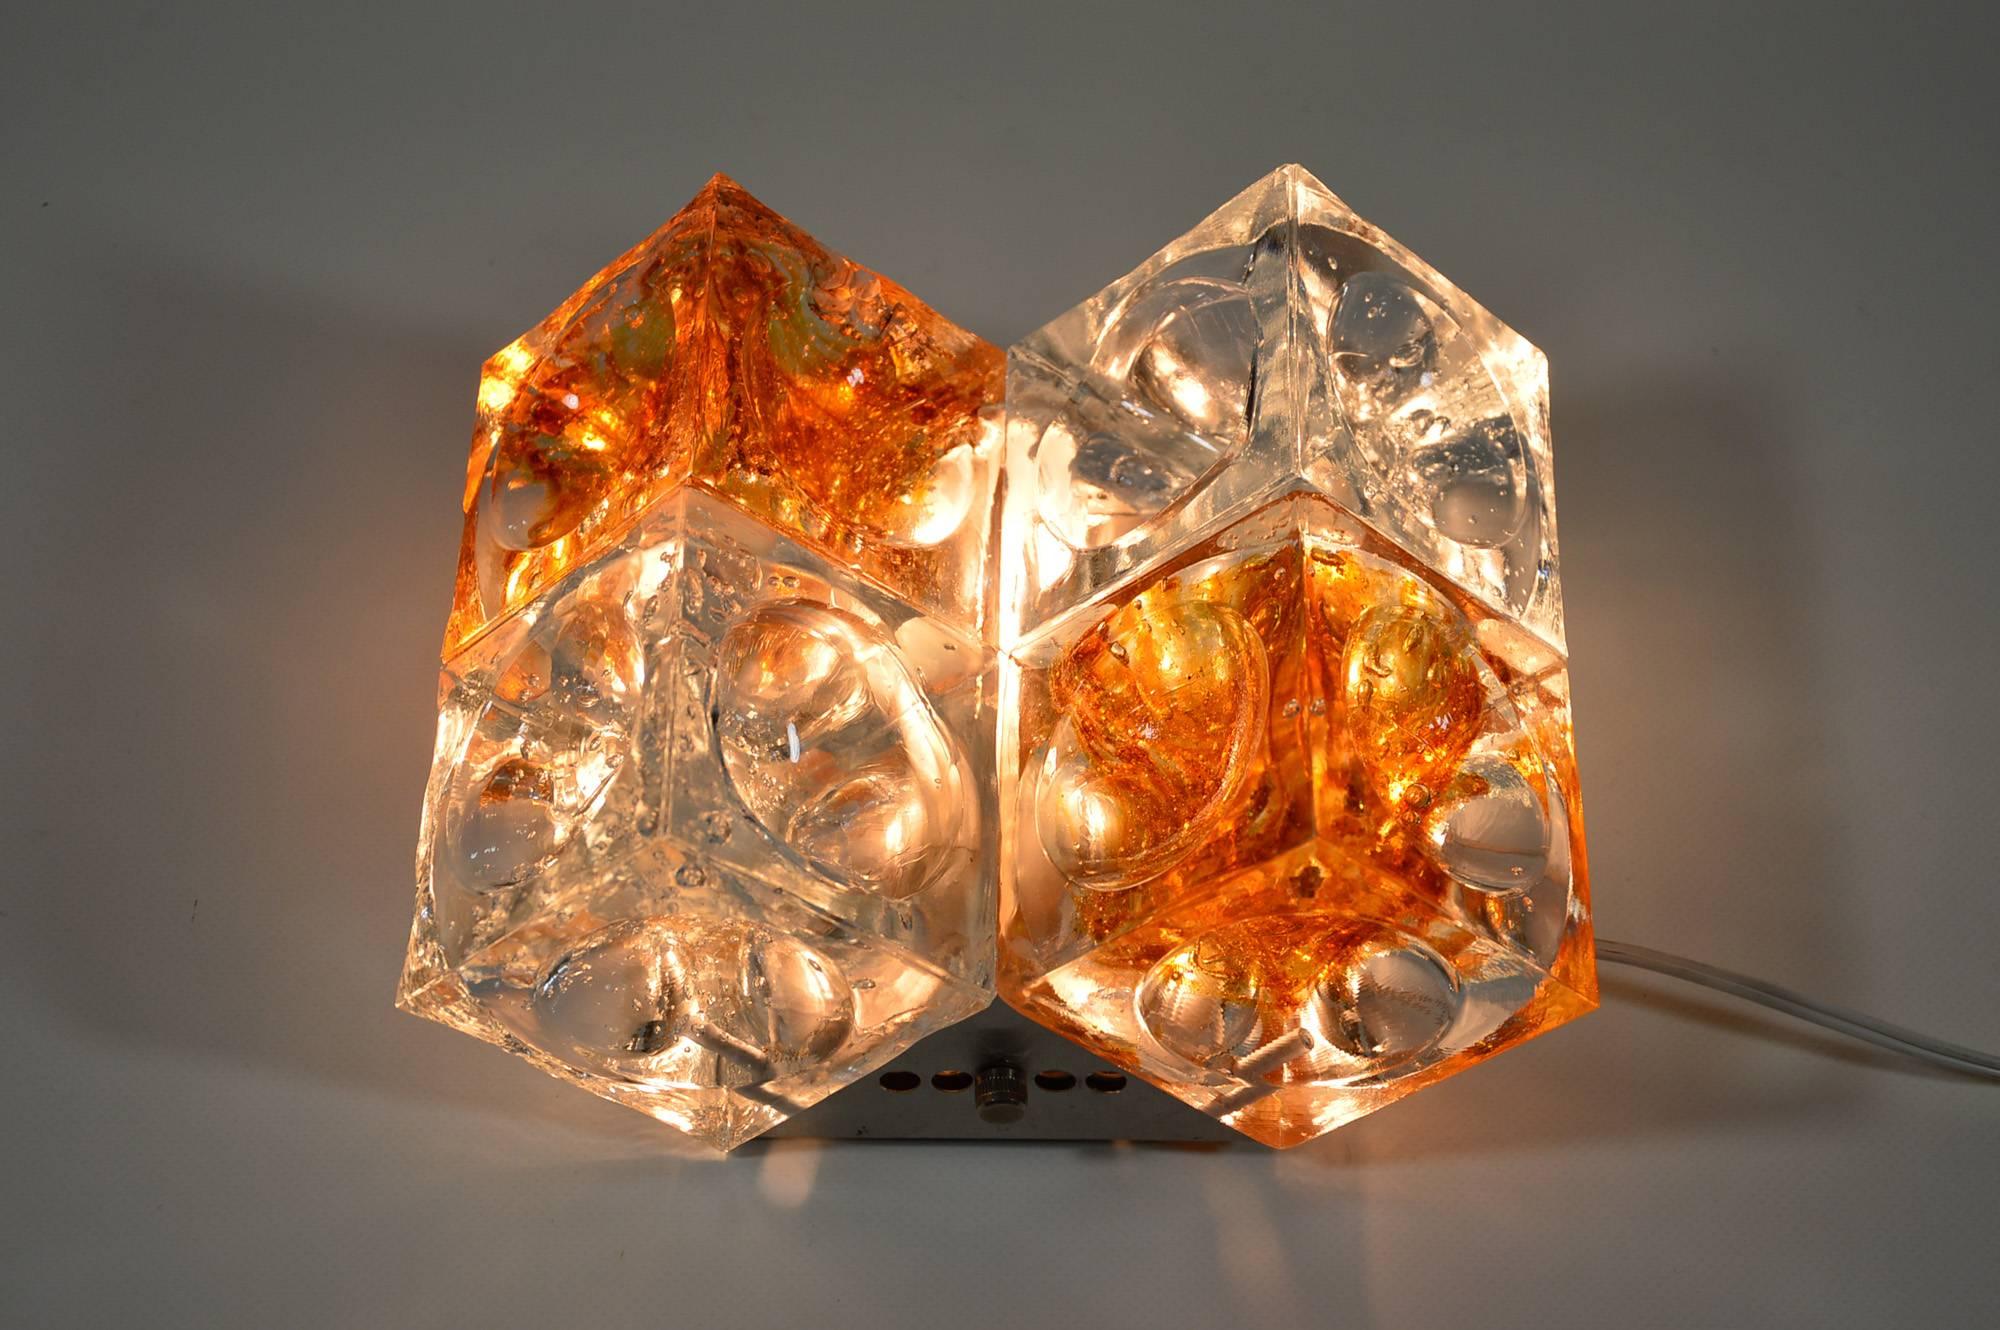 Pair of Italian Glass Wall Lamps by Albano Poli for Poliarte, 1970s For Sale 2